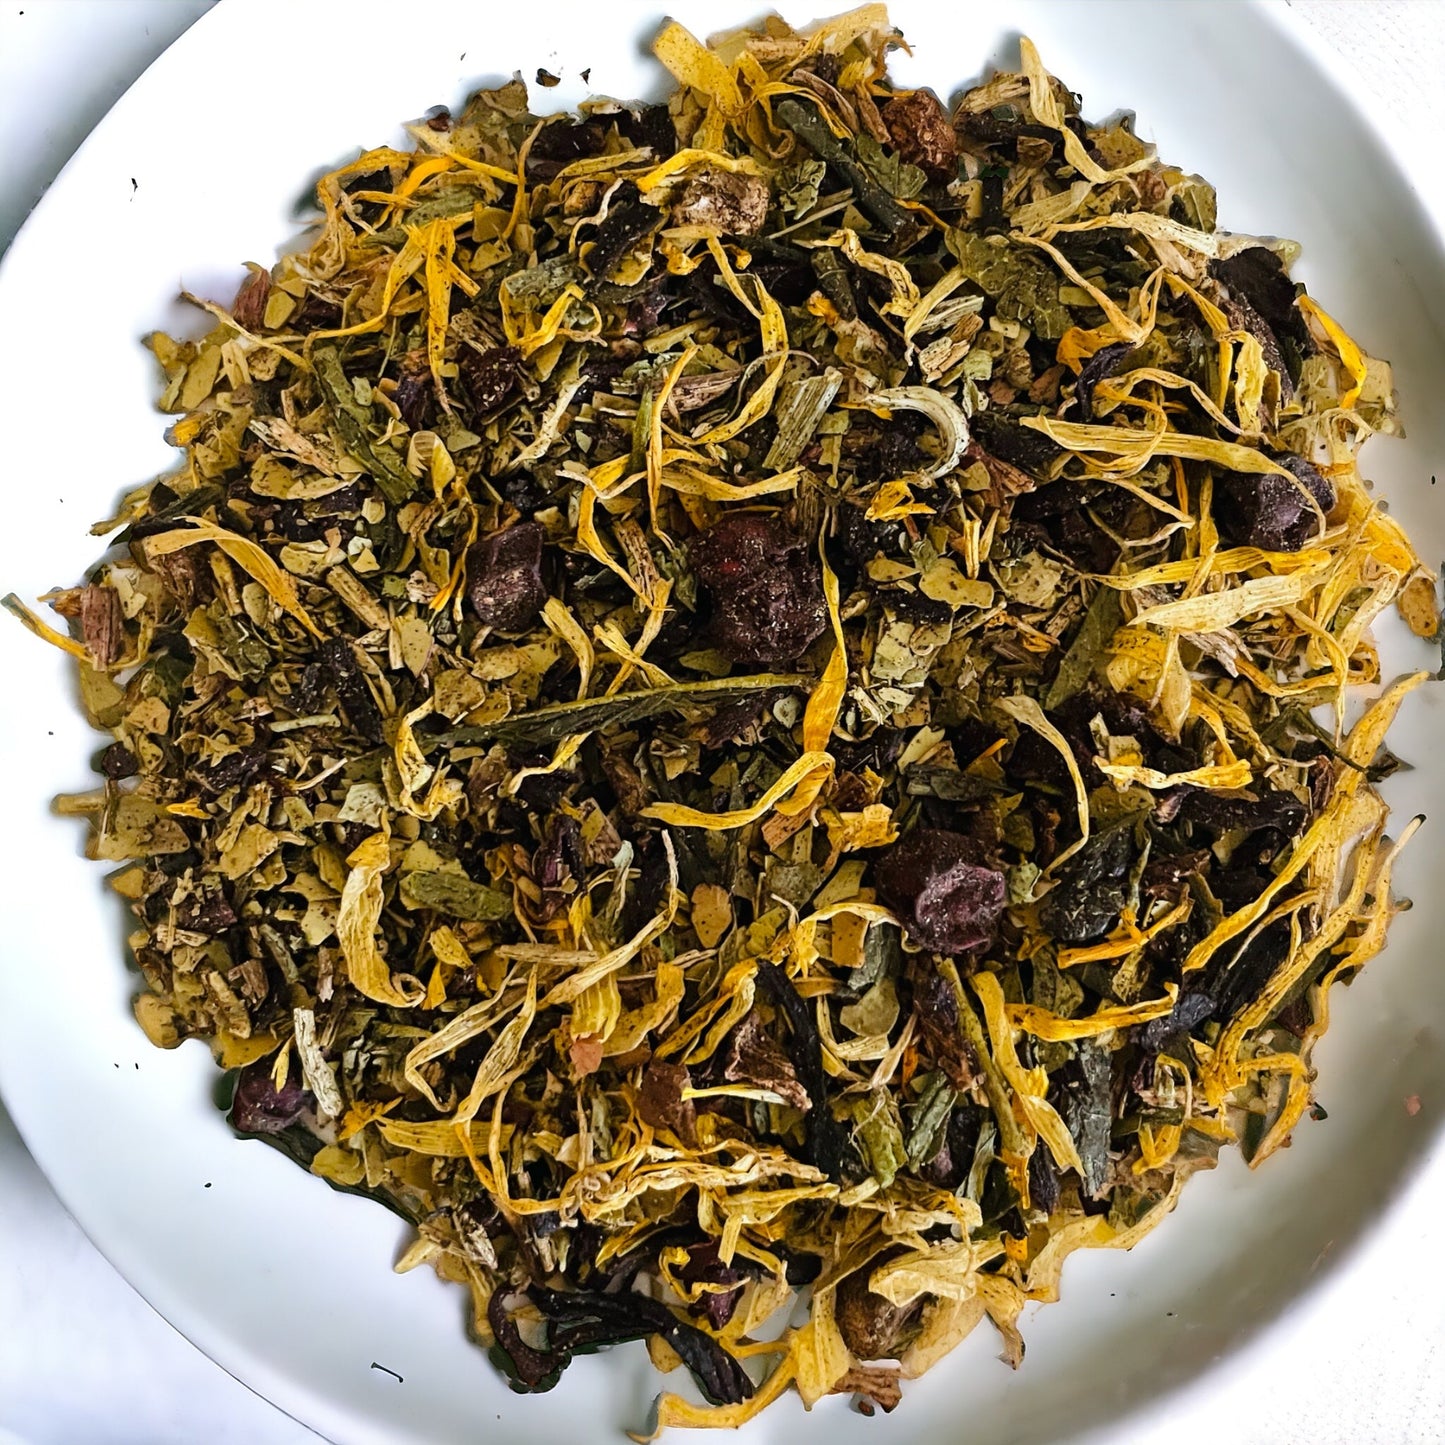 Organic dried yellow and green slimming tea herbs on a whiter plate